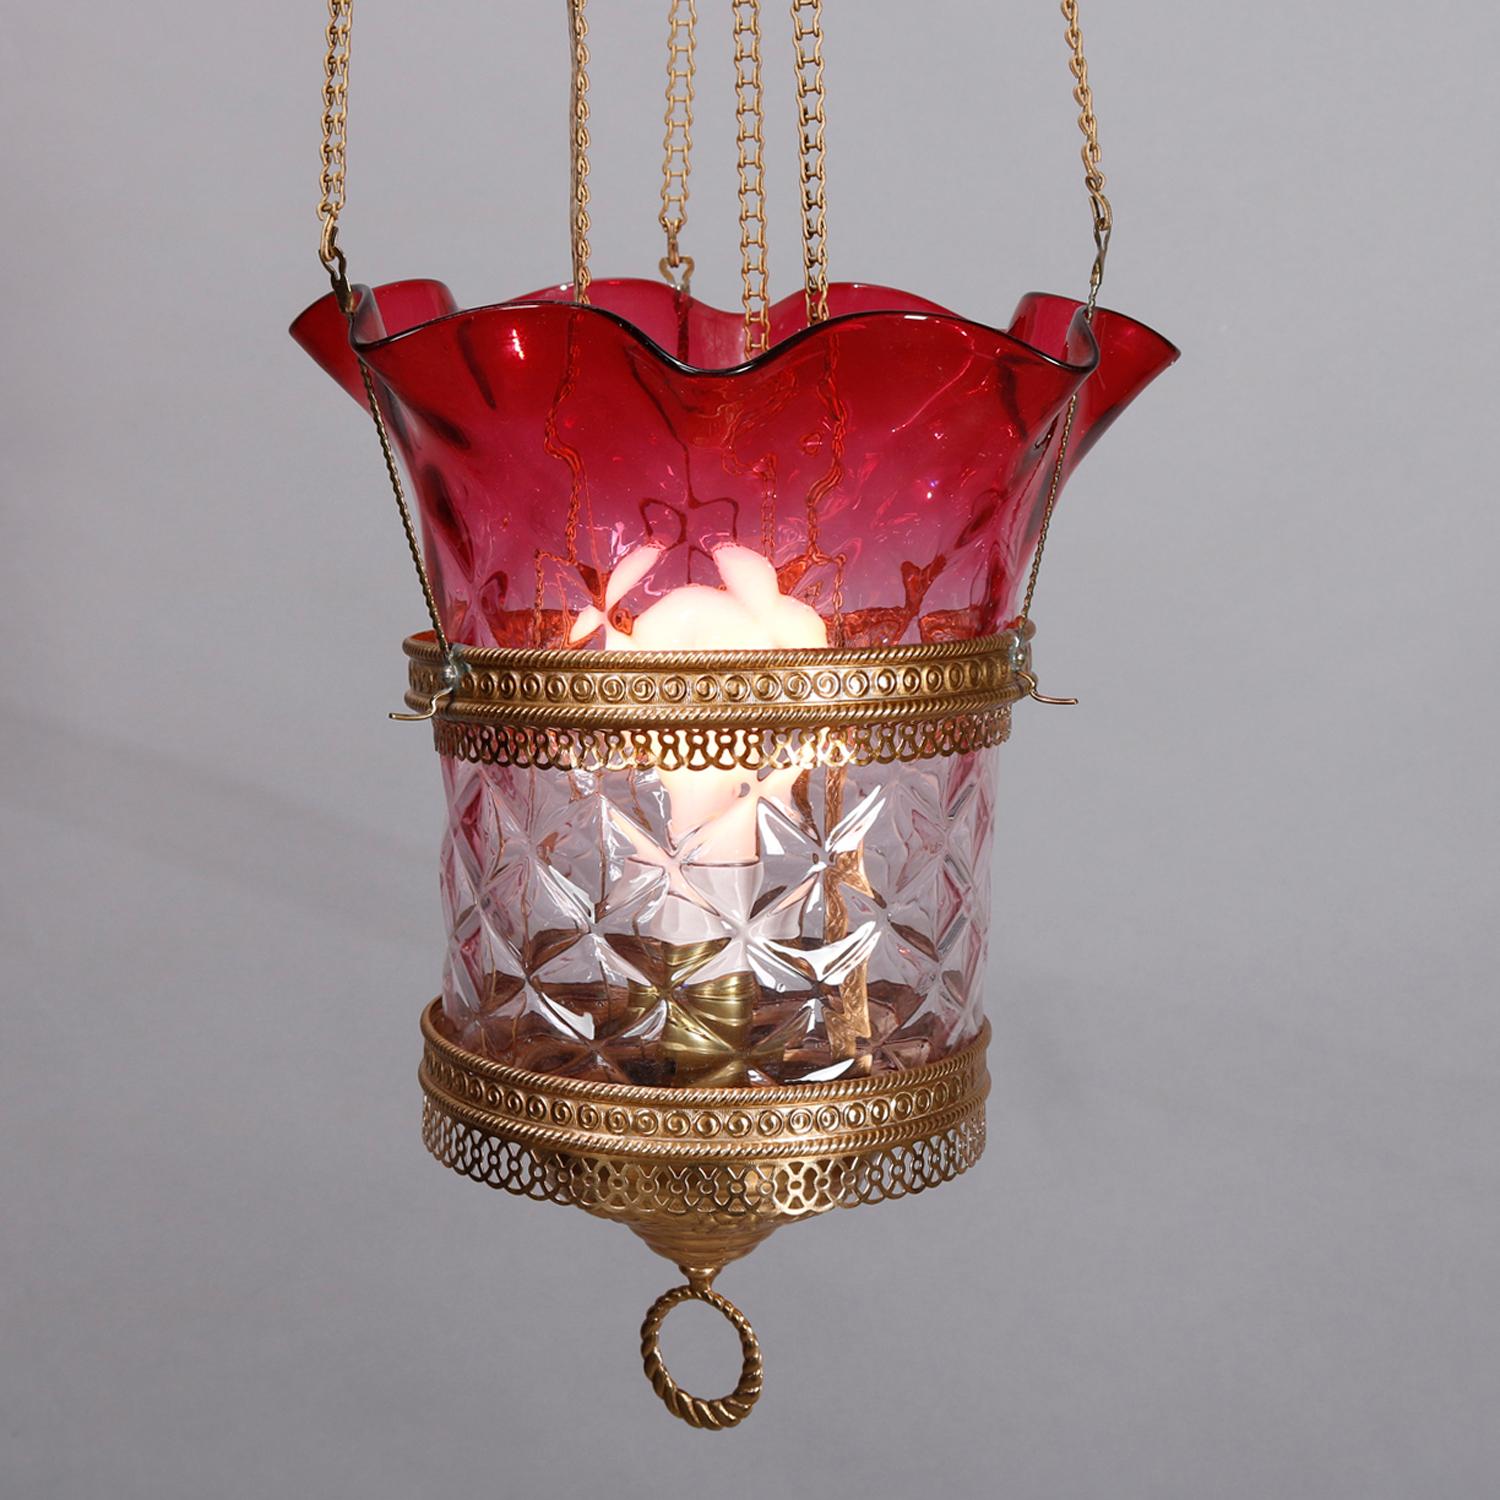 An antique Victorian hall light offers a suspended pierced brass frame housing an ombre cranberry to clear glass shade with diamond patterning and ruffled rim, electrified, circa 1890


Measures: 34